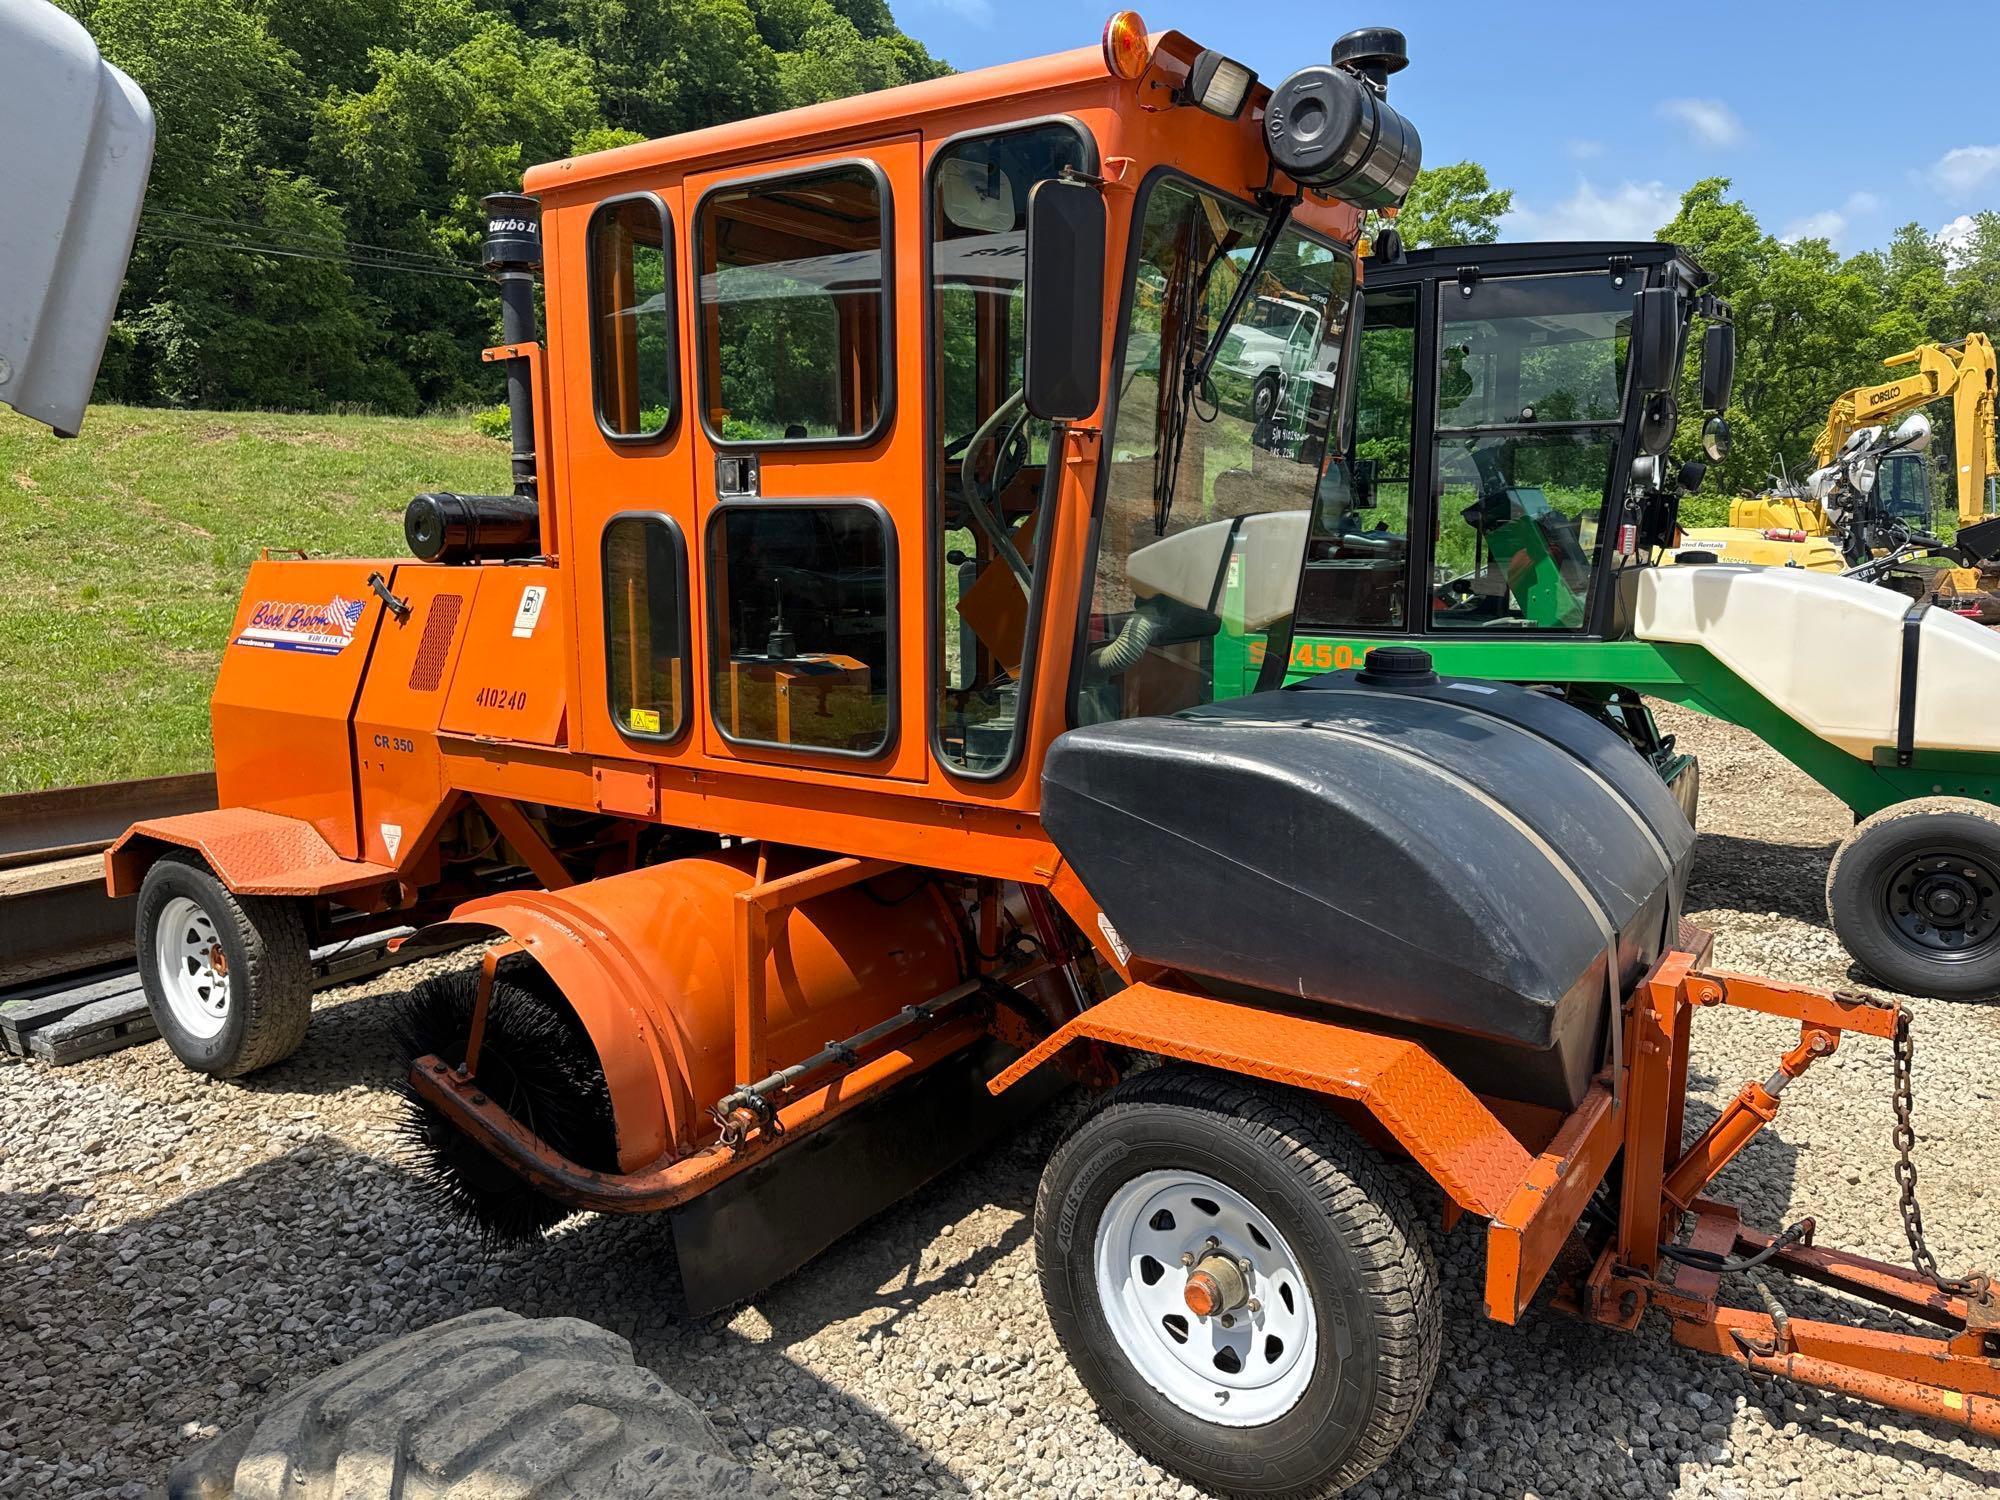 2018 BROCE CR350 SWEEPER powered by diesel engine, equipped with EROPS, air, heat, 8ft. sweeper,